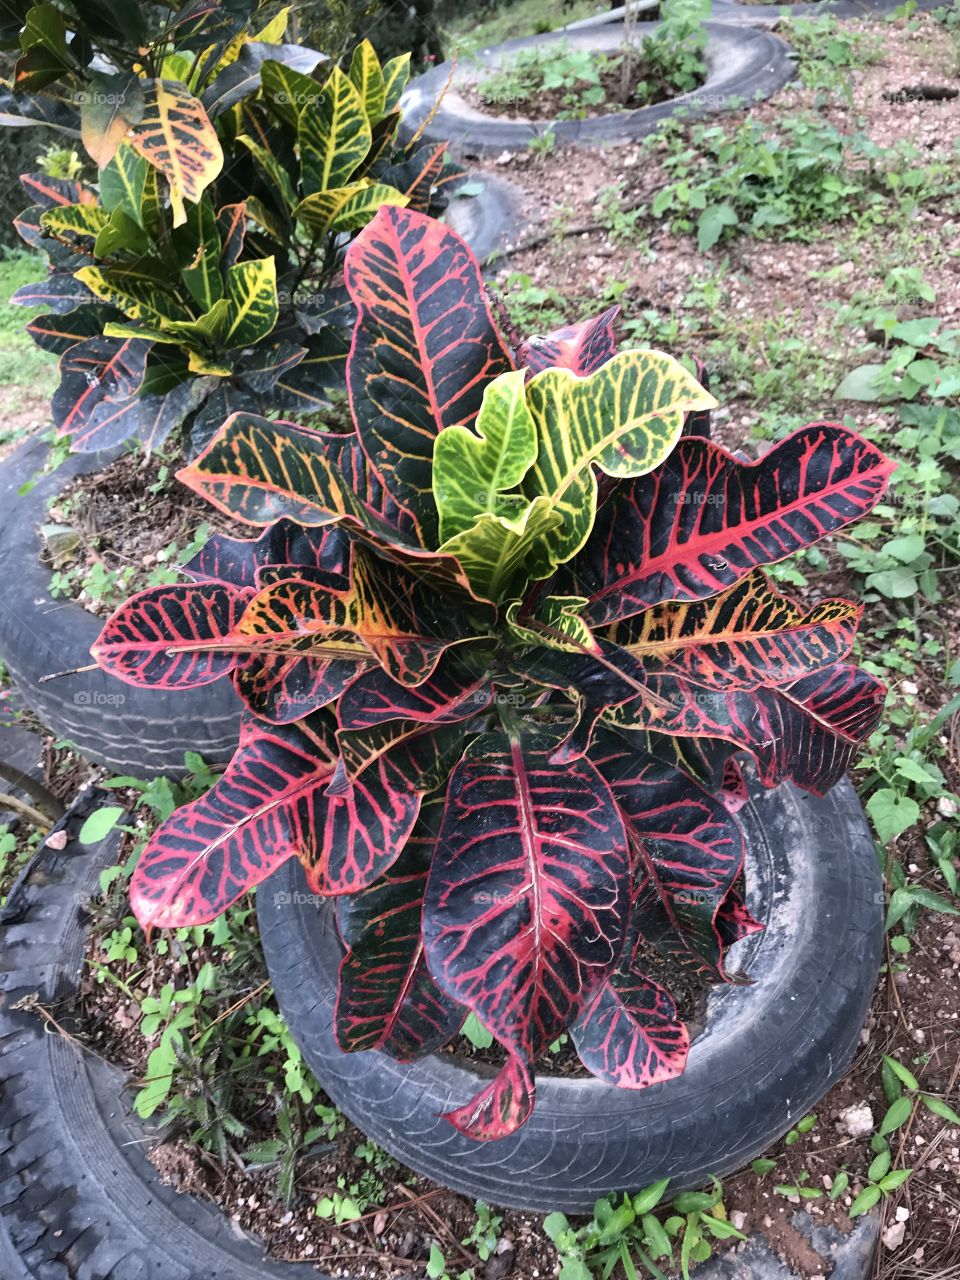 This rainbow plant looks almost too beautiful to be real with its crisp leaves and contrasting black showcasing the veins of colour throughout the leaves. Its trendy container shows creativity and resourcefulness.